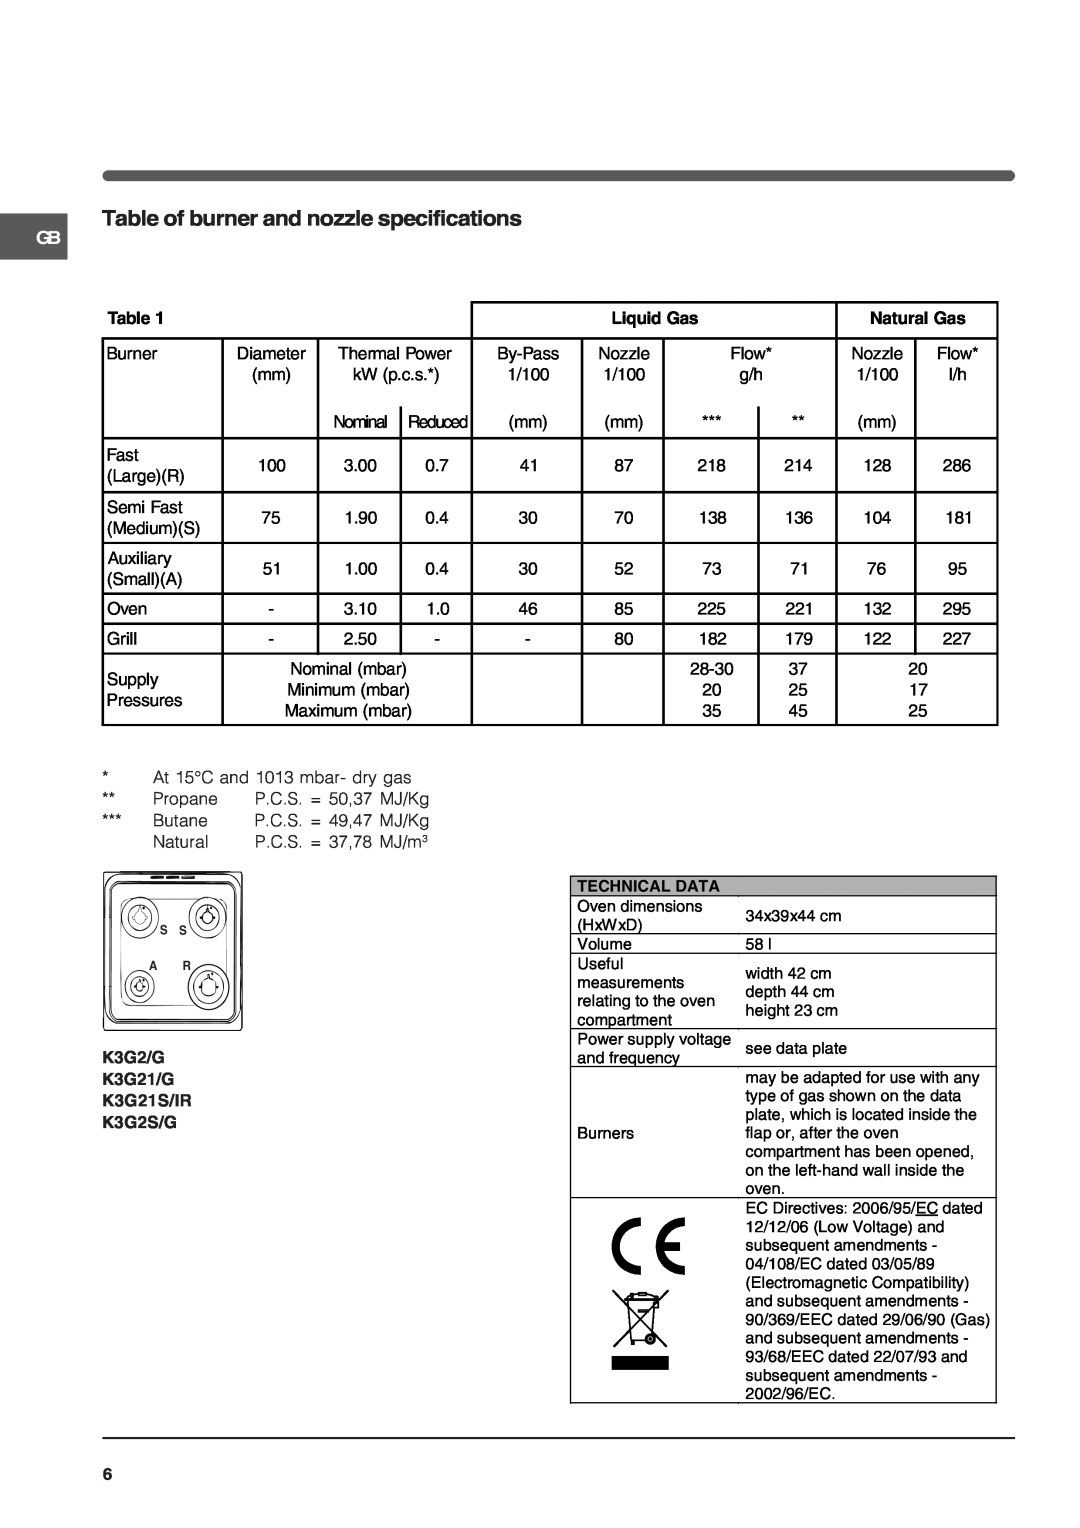 Indesit K3G2S/G Table of burner and nozzle specifications, Liquid Gas, Natural Gas 